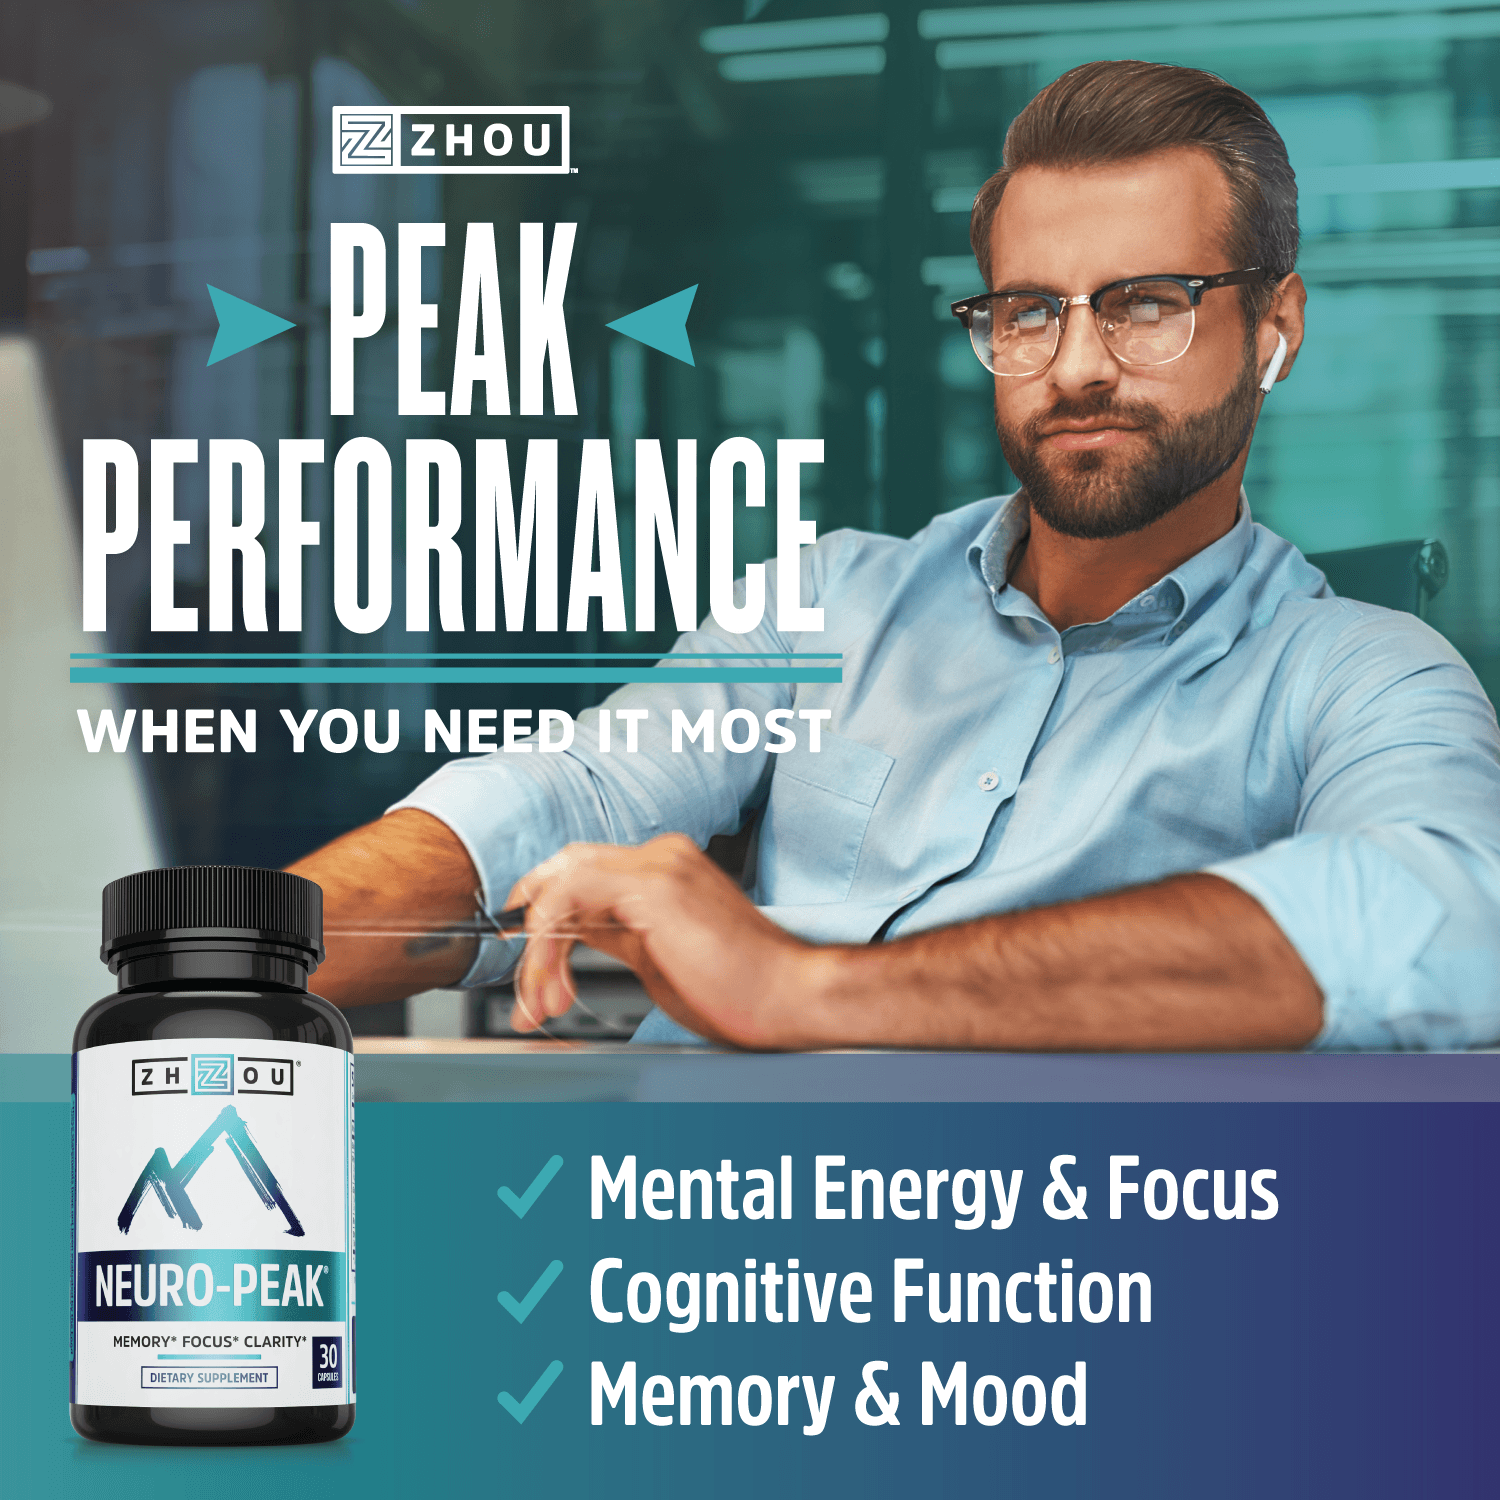 Peak performance when you need it most. Mental energy & focus, cognitive function, memory & mood